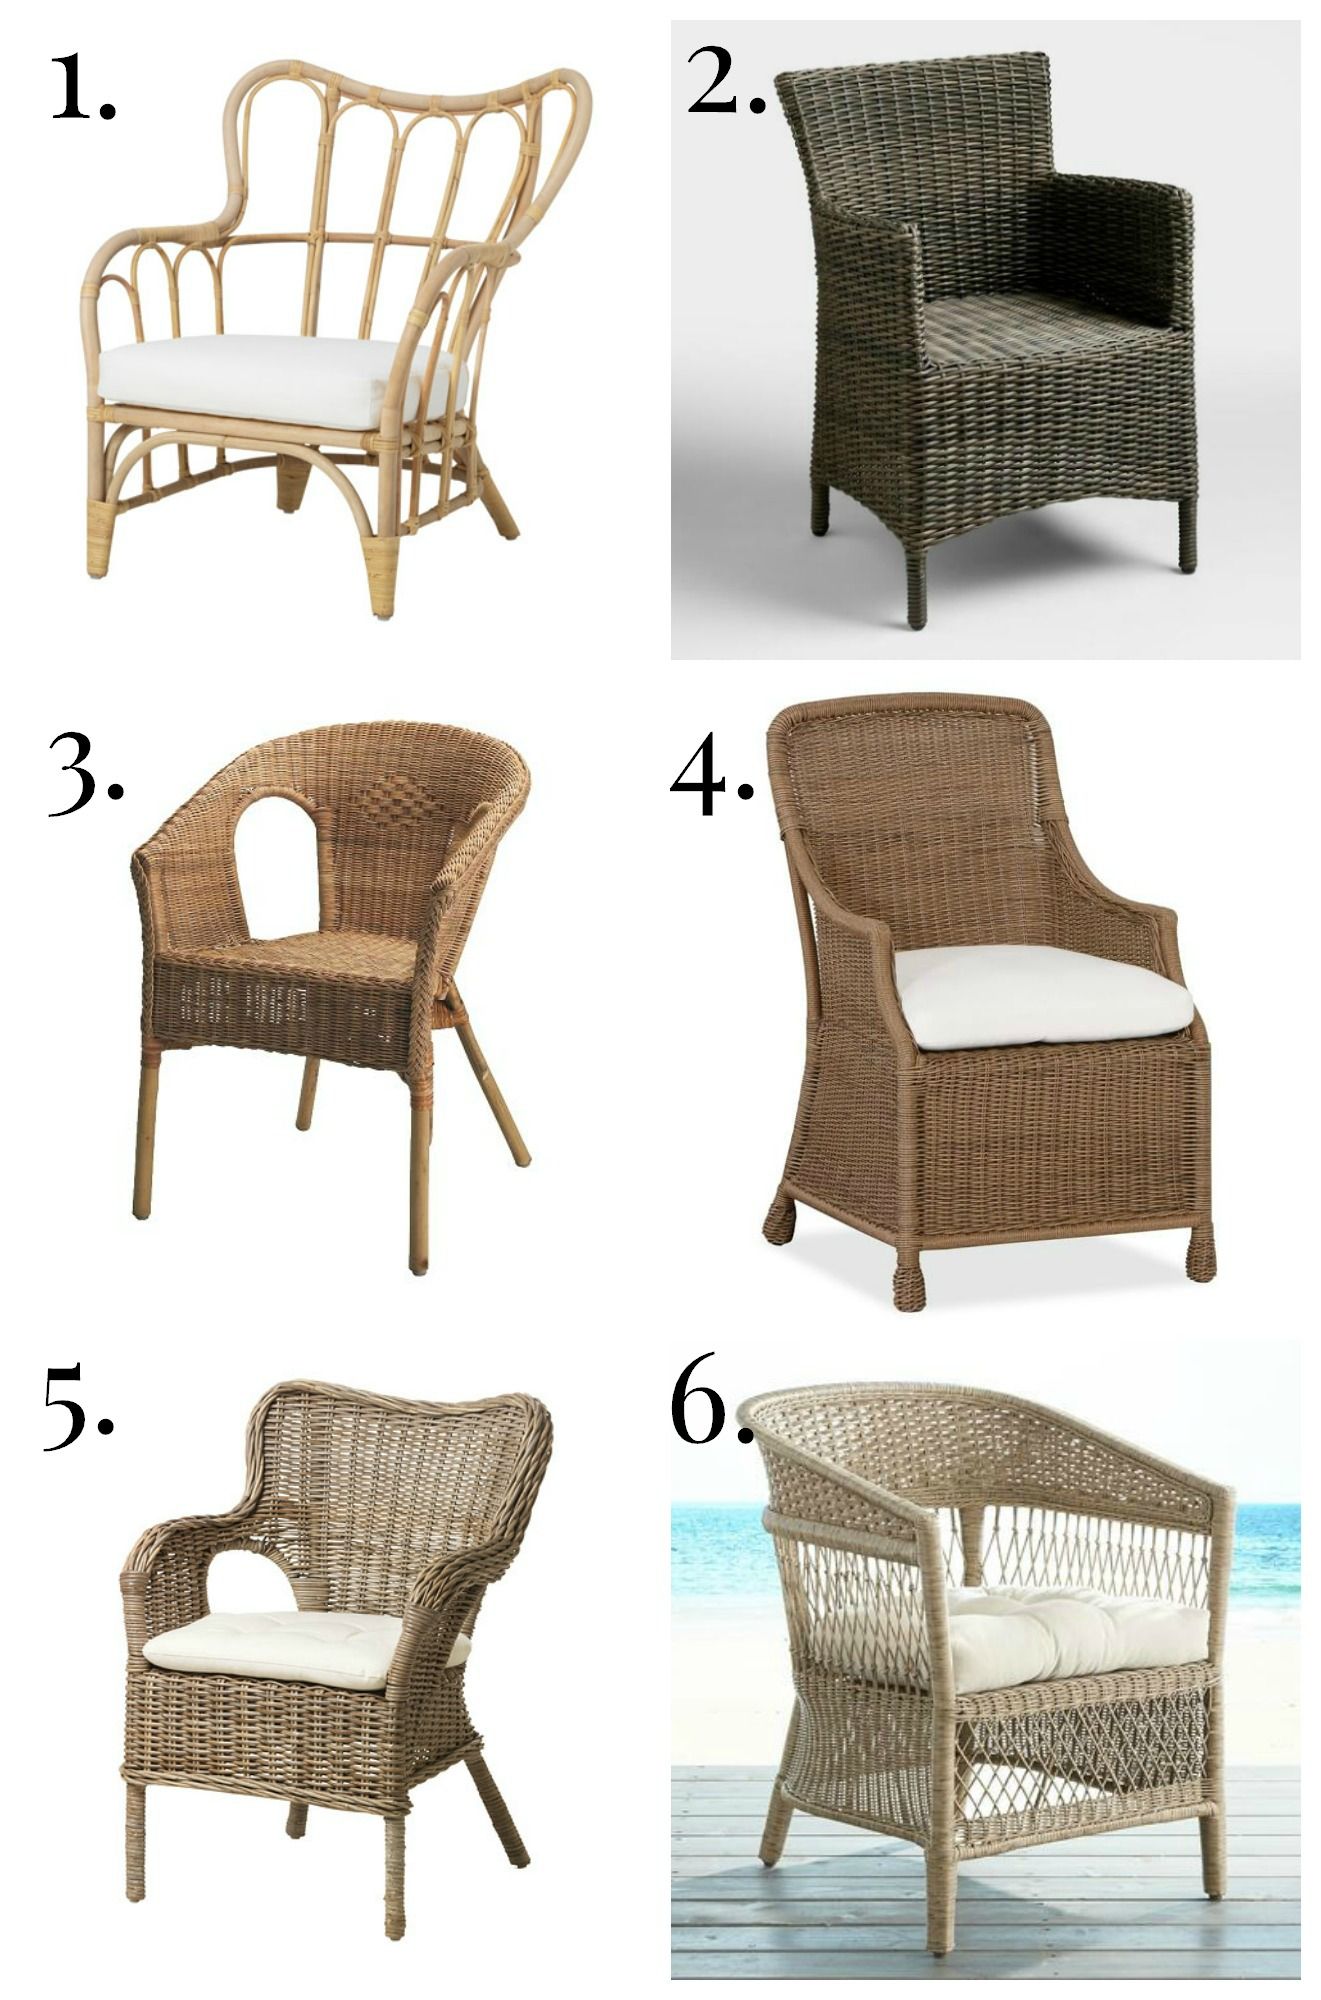 Get completely rested and relaxed with
wicker chairs